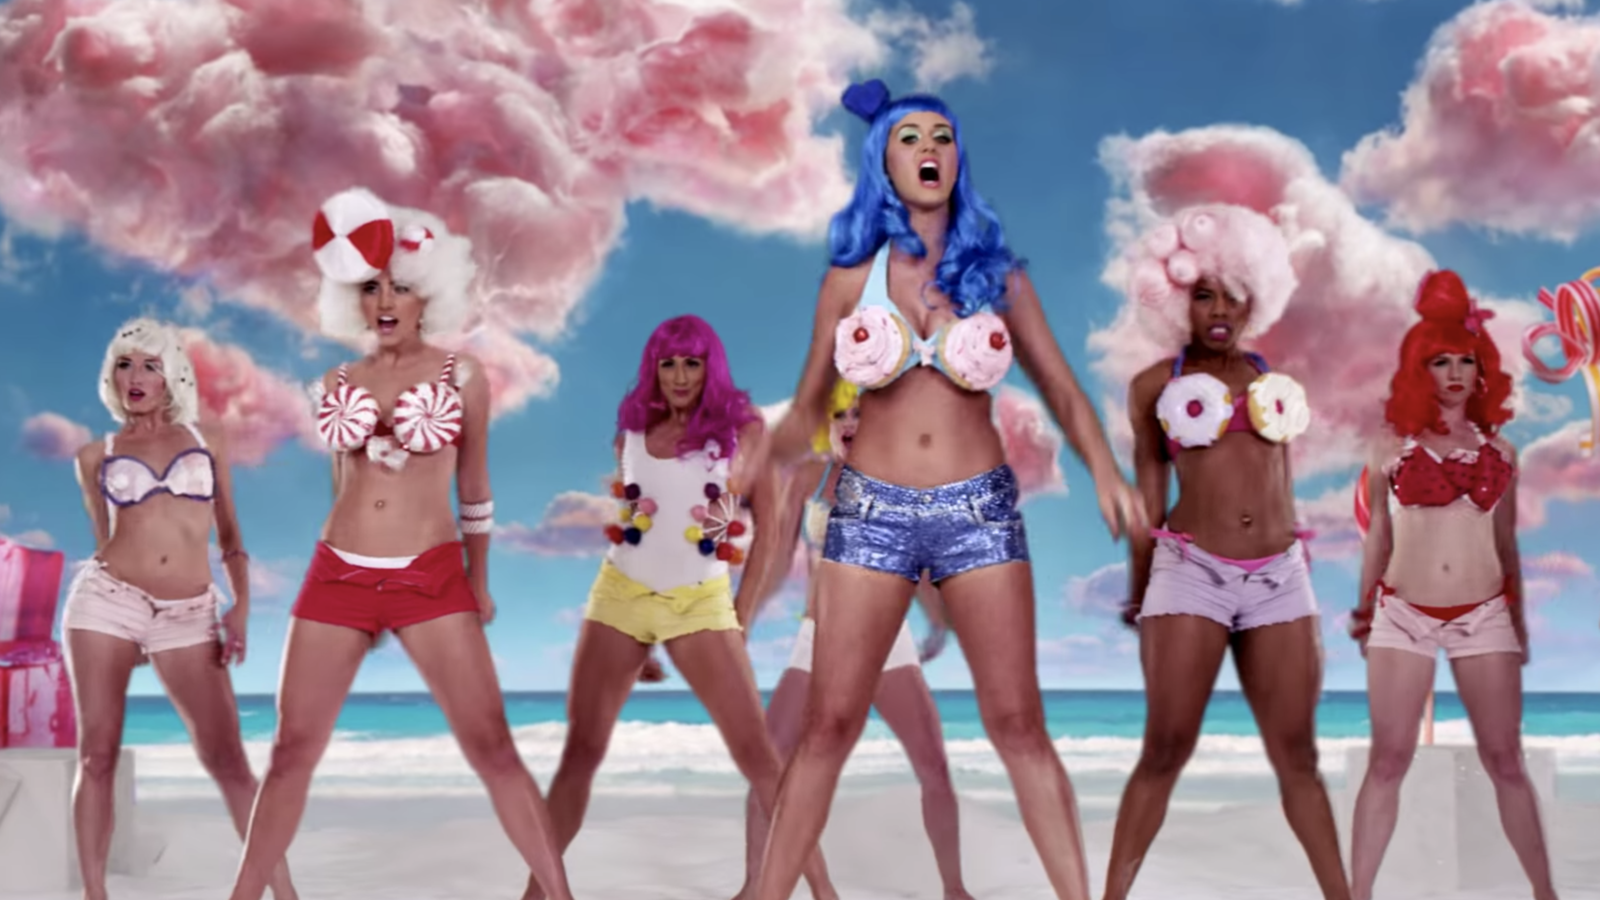 Katy Perry wearing a cupcake bra in the music video 